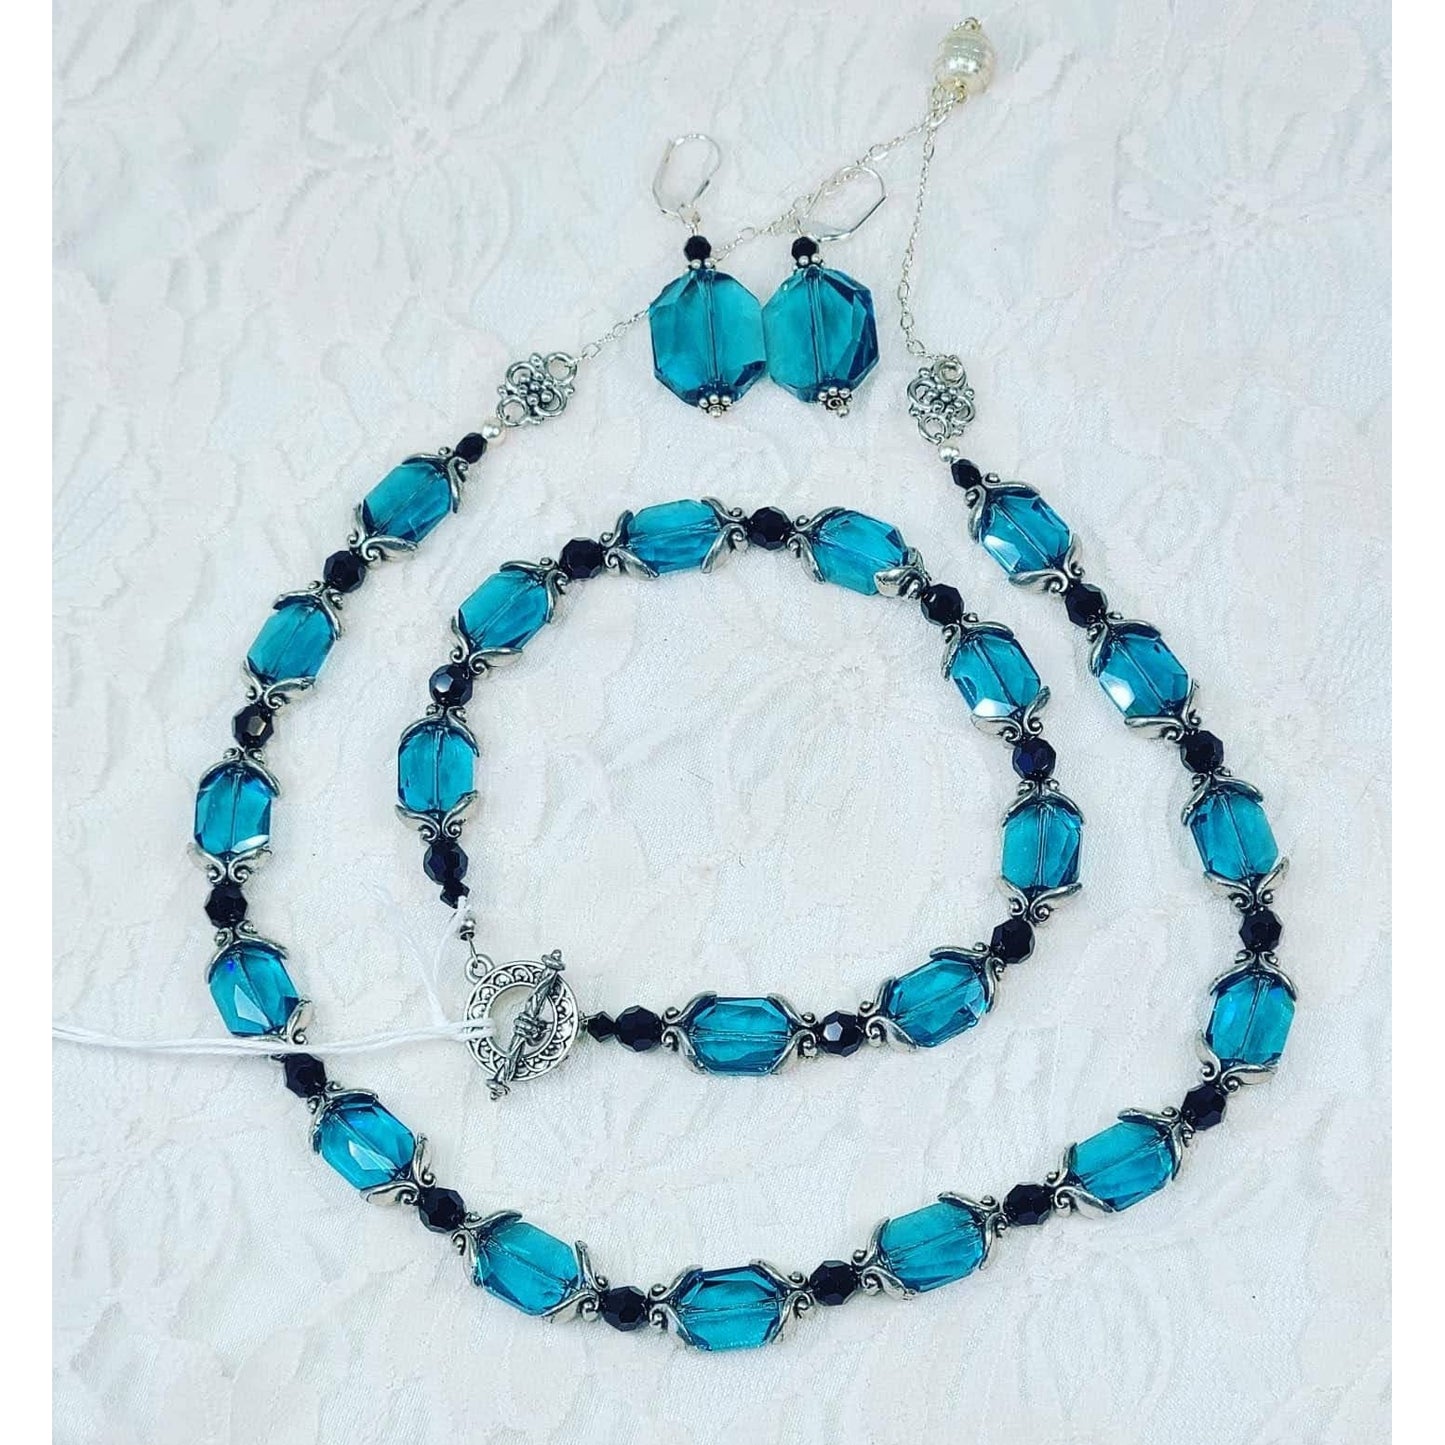 Jewelry SET Earrings, Bracelet, Necklace Blue Teal Swarovski Crystals and Black Czech Glass Beads with STERLING Silver Accents